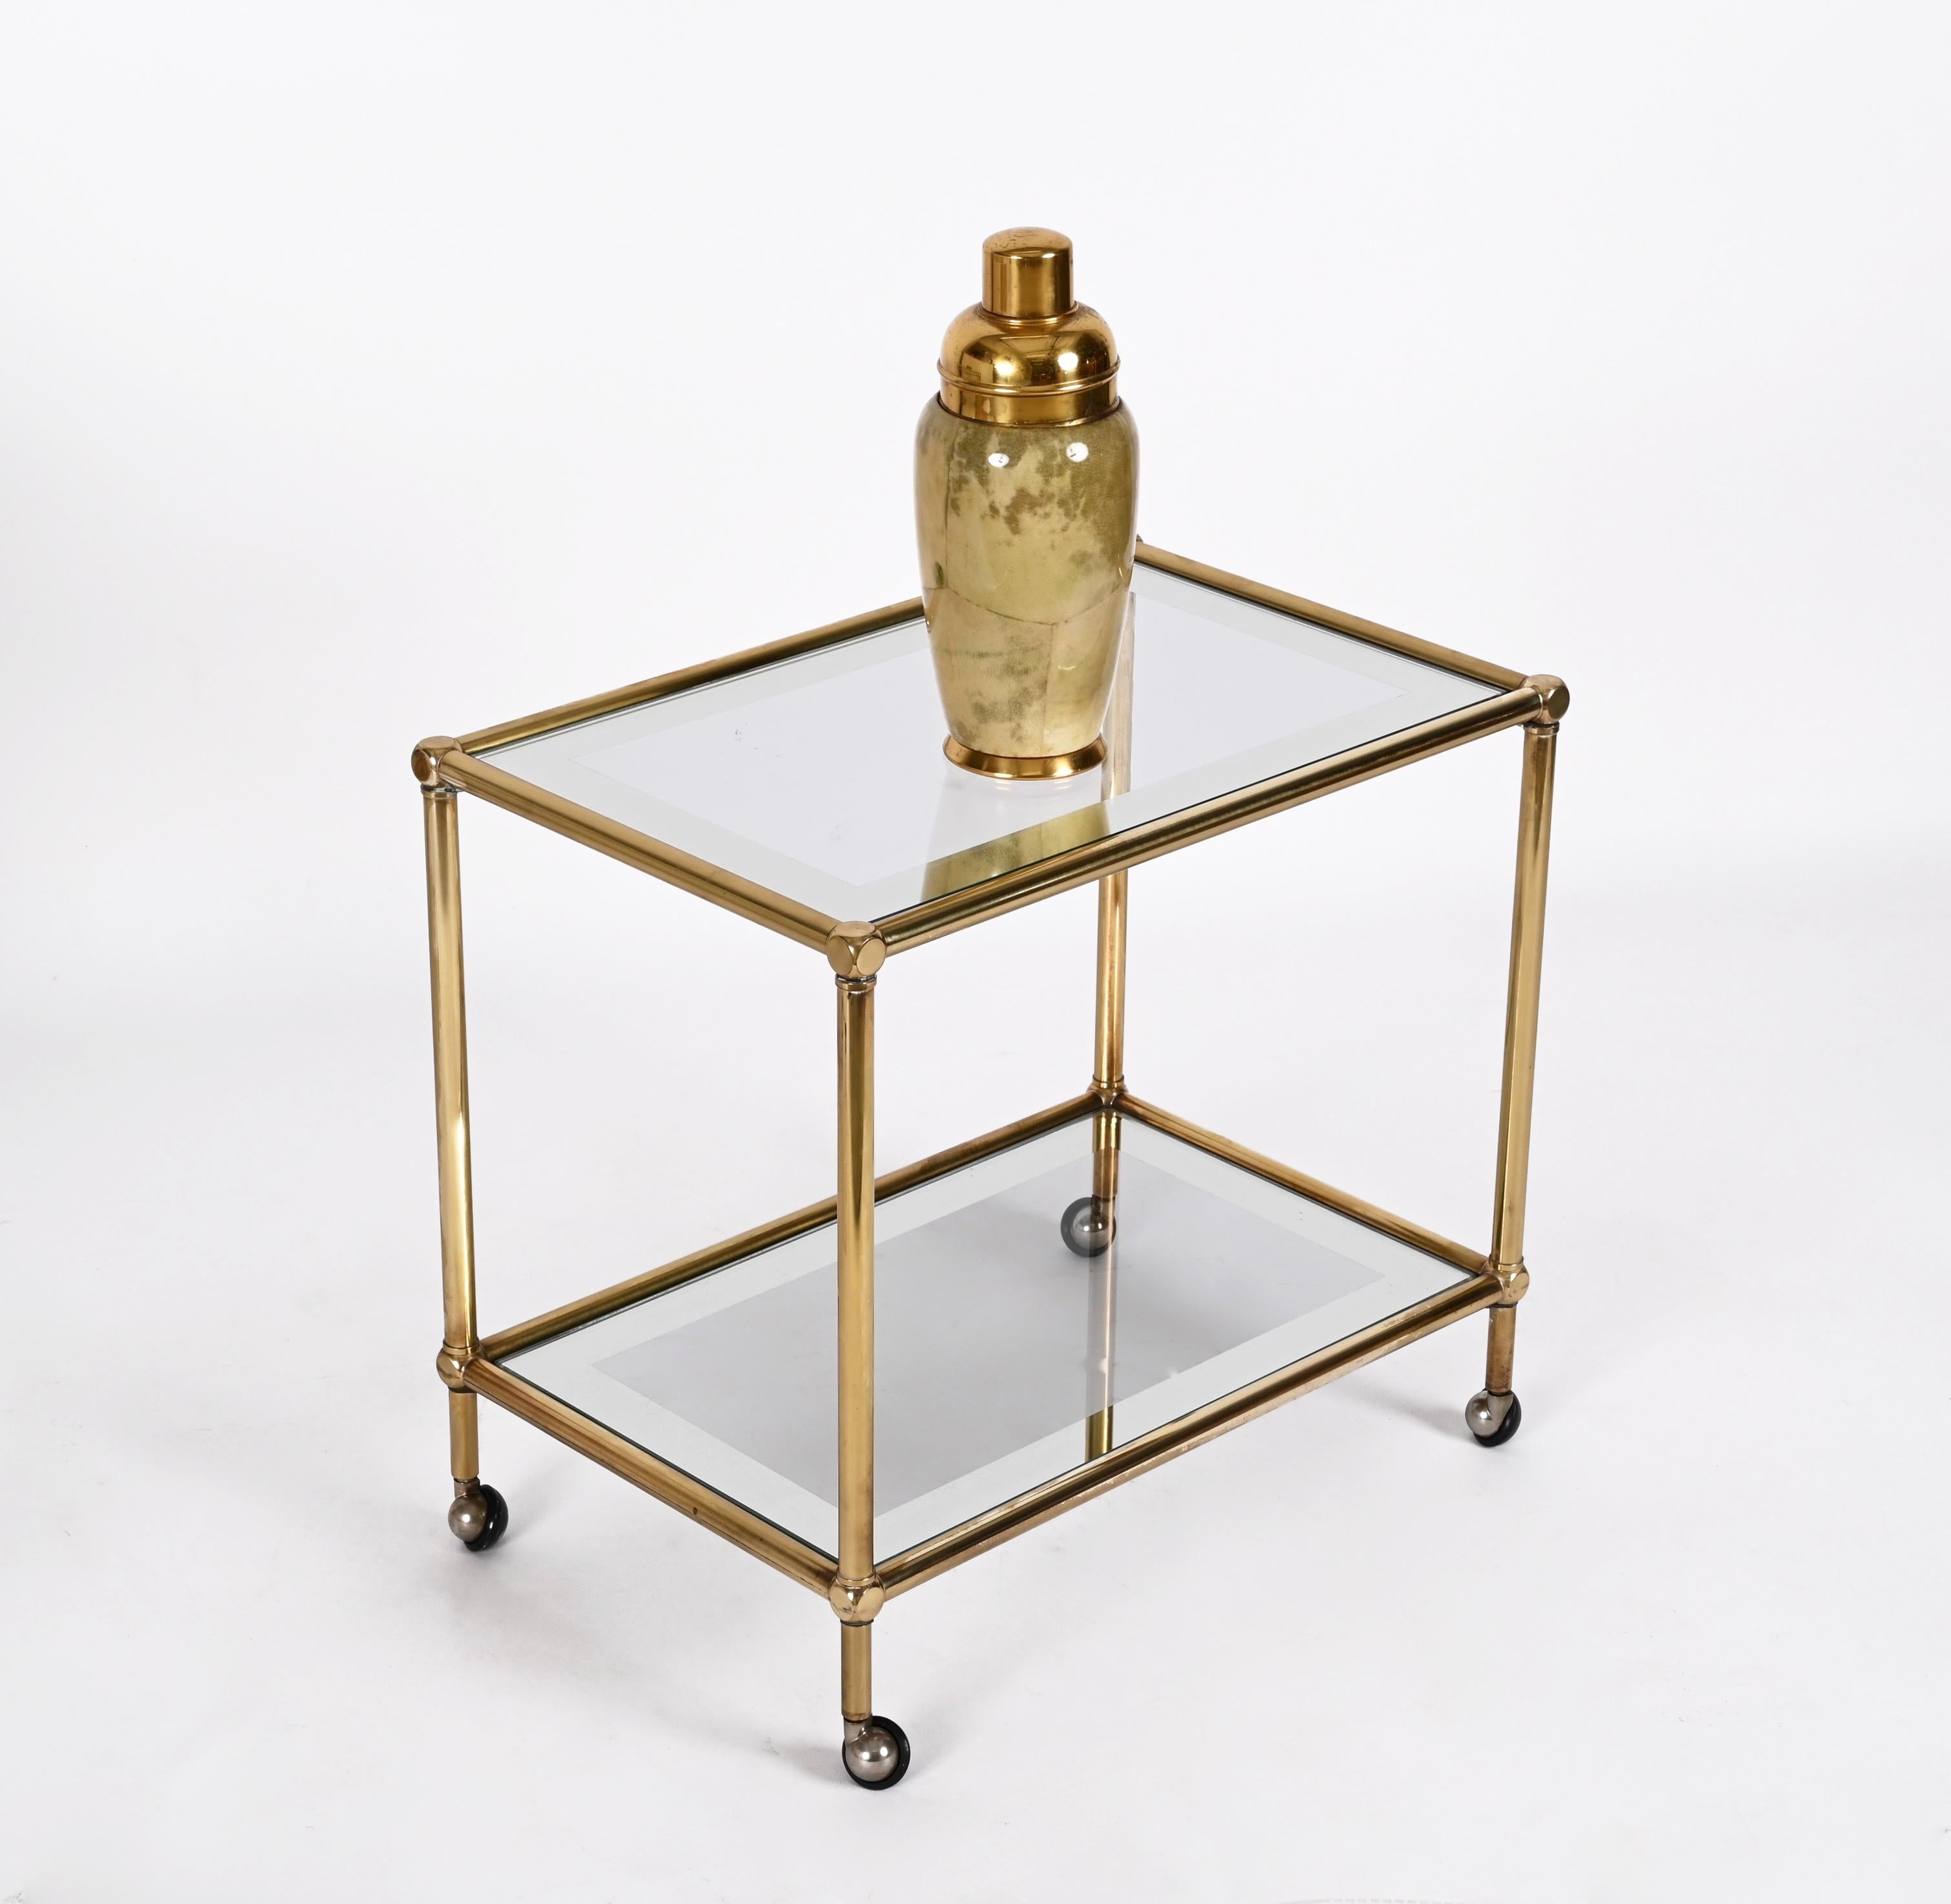 Set of Brass Mirrored Border with Glass Top Nesting Tables, Maison Jansen, 1970s For Sale 3